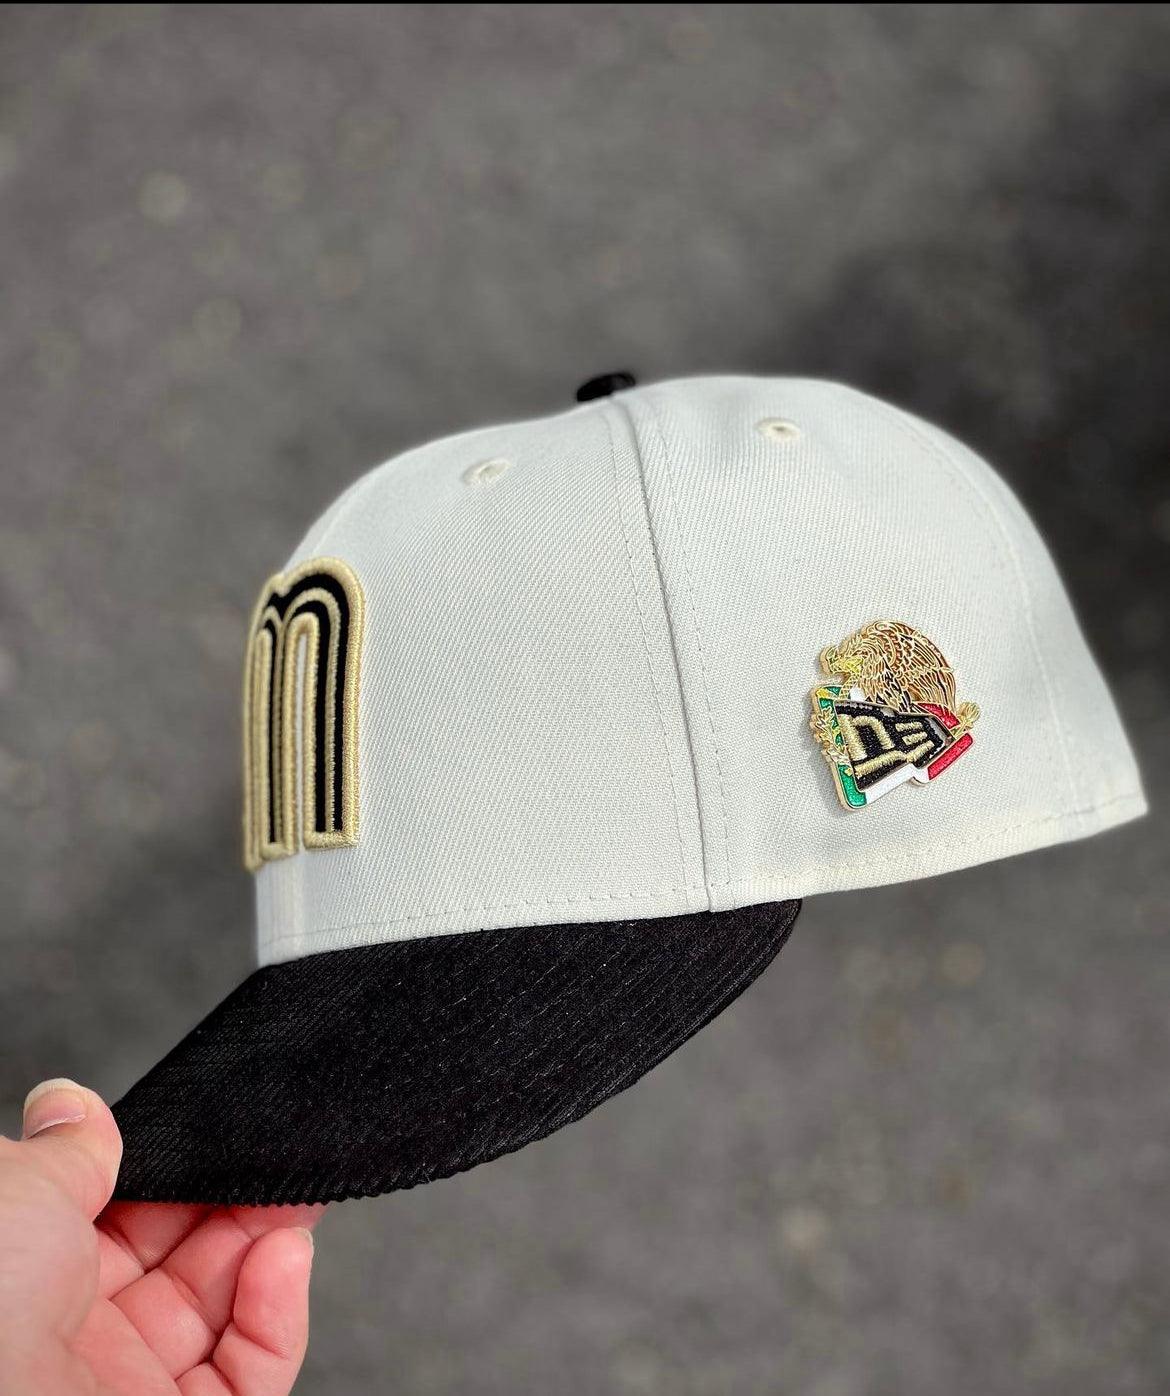 Pin on hats